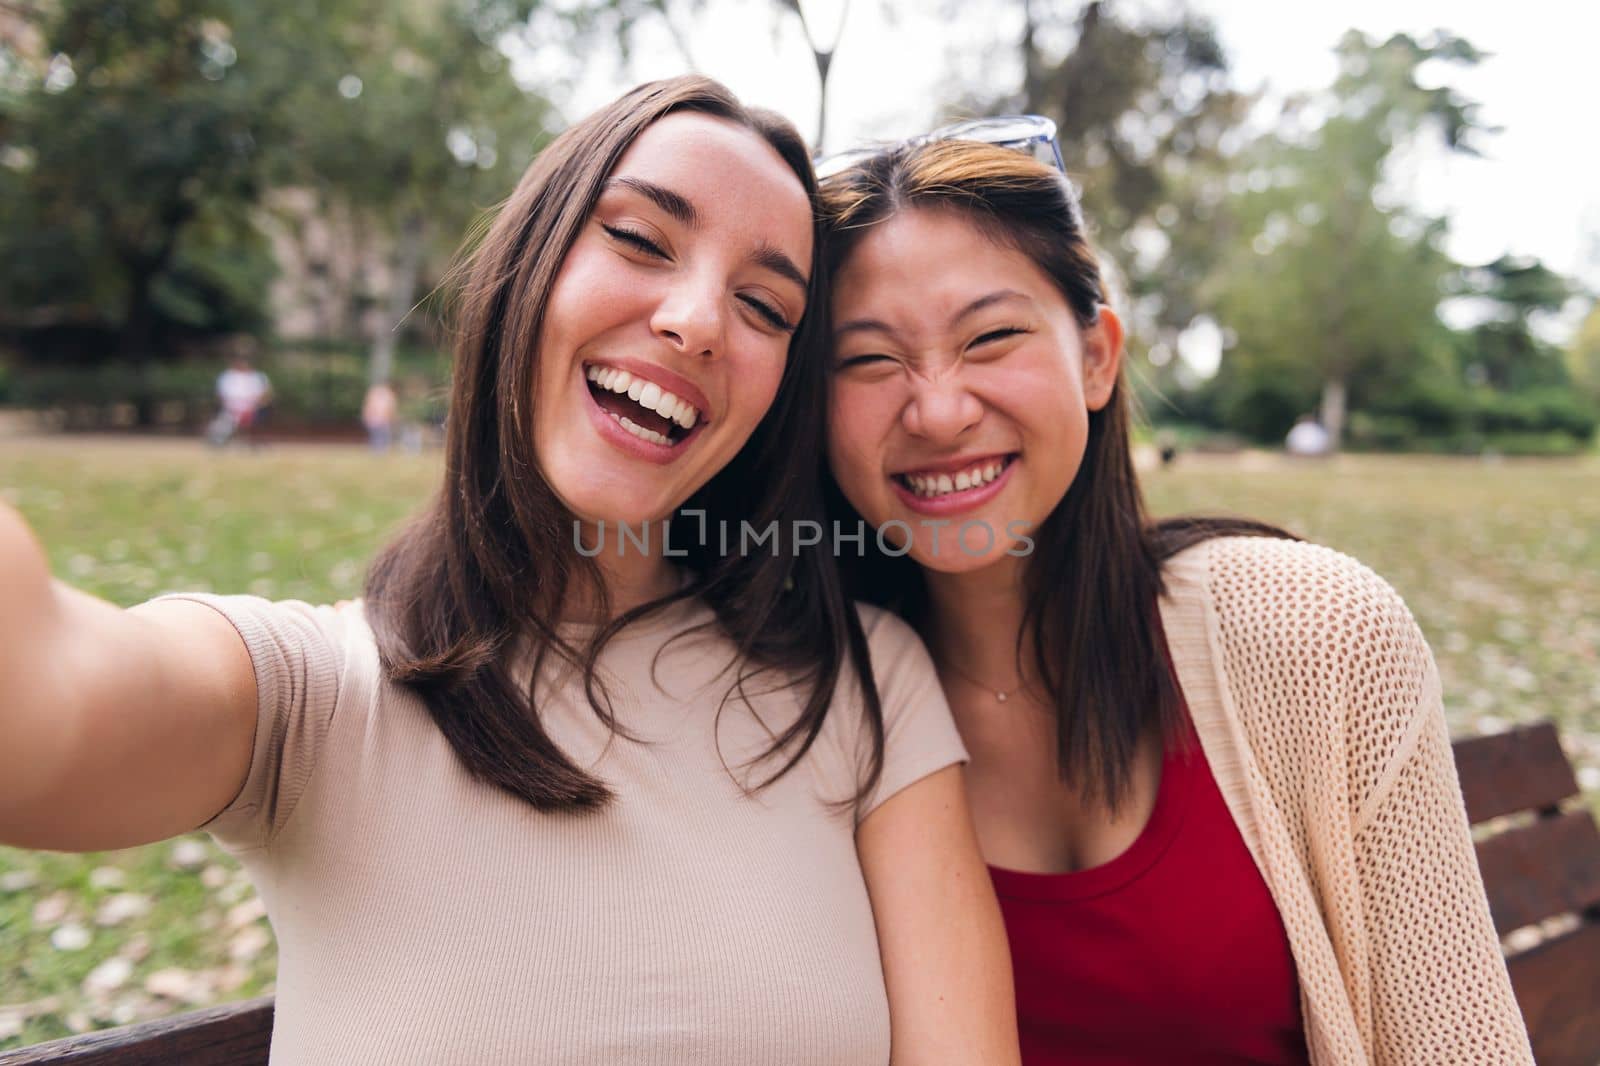 selfie photo of two happy young women laughing at park, concept of youth and friendship